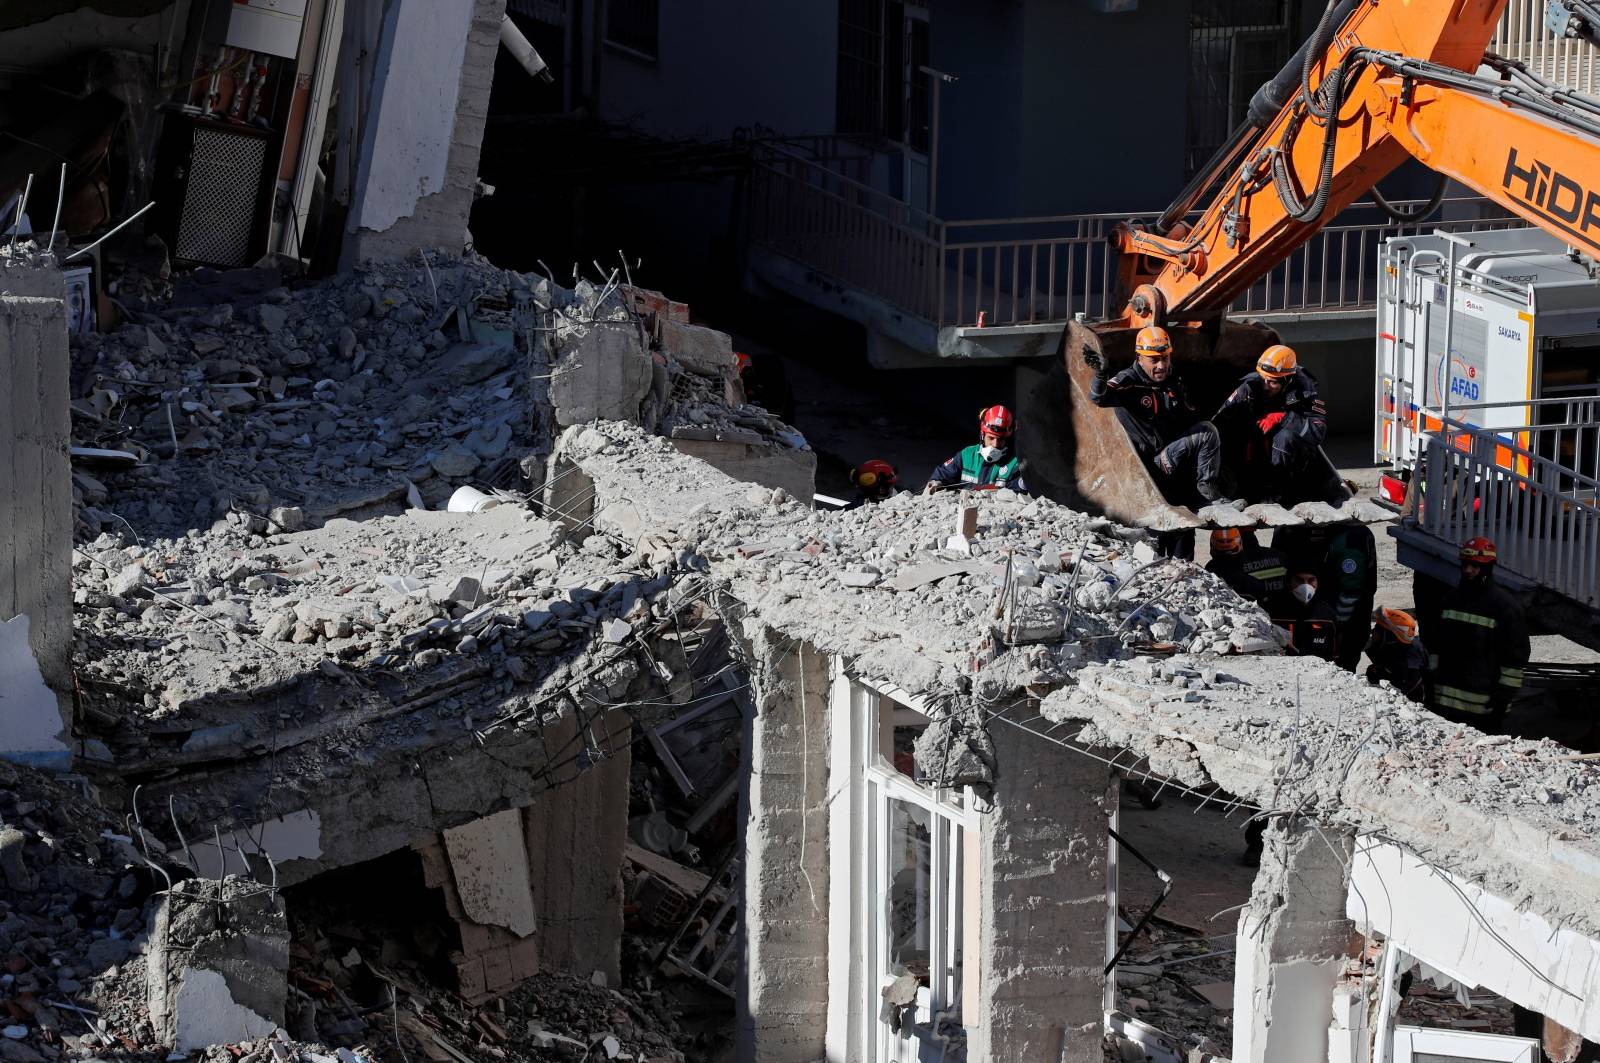 Rescue workers search the site of a collapsed building, after an earthquake in Elazig